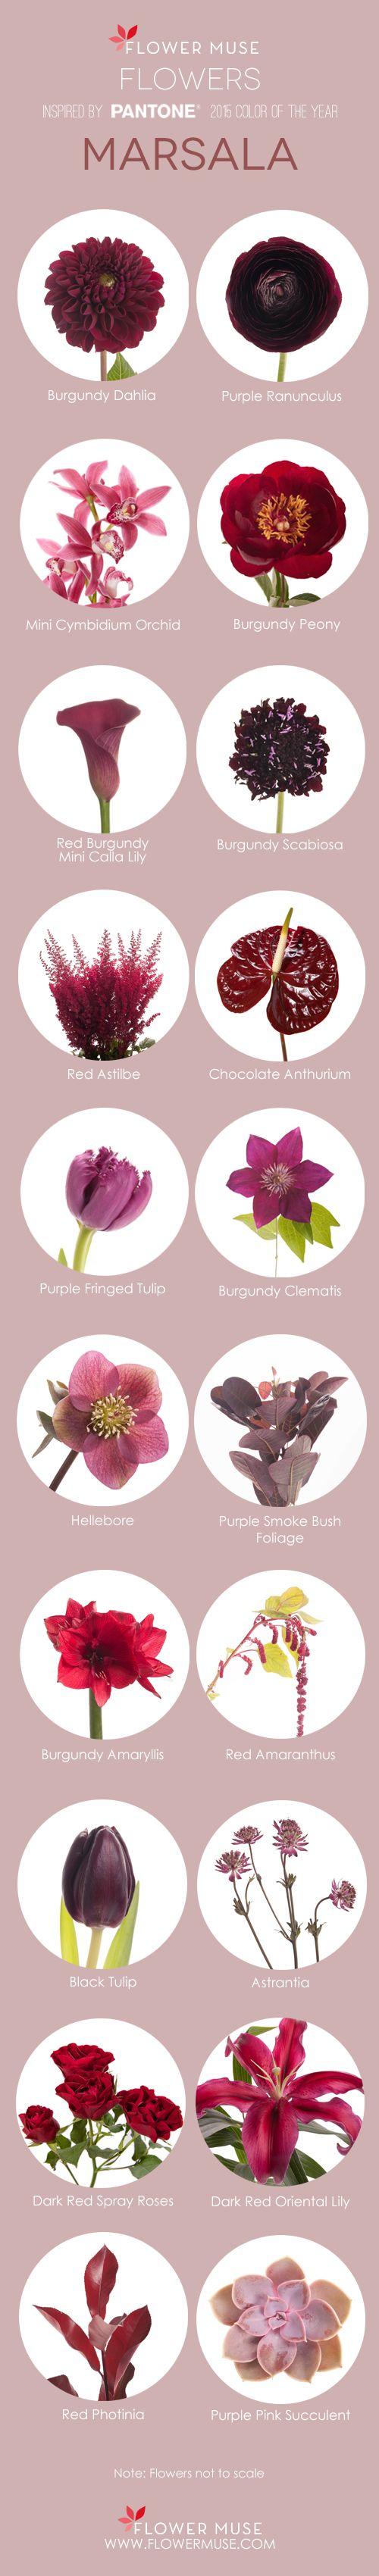 Wedding - Color Of The Year Marsala Flower Inspiration - Flower Muse Blog